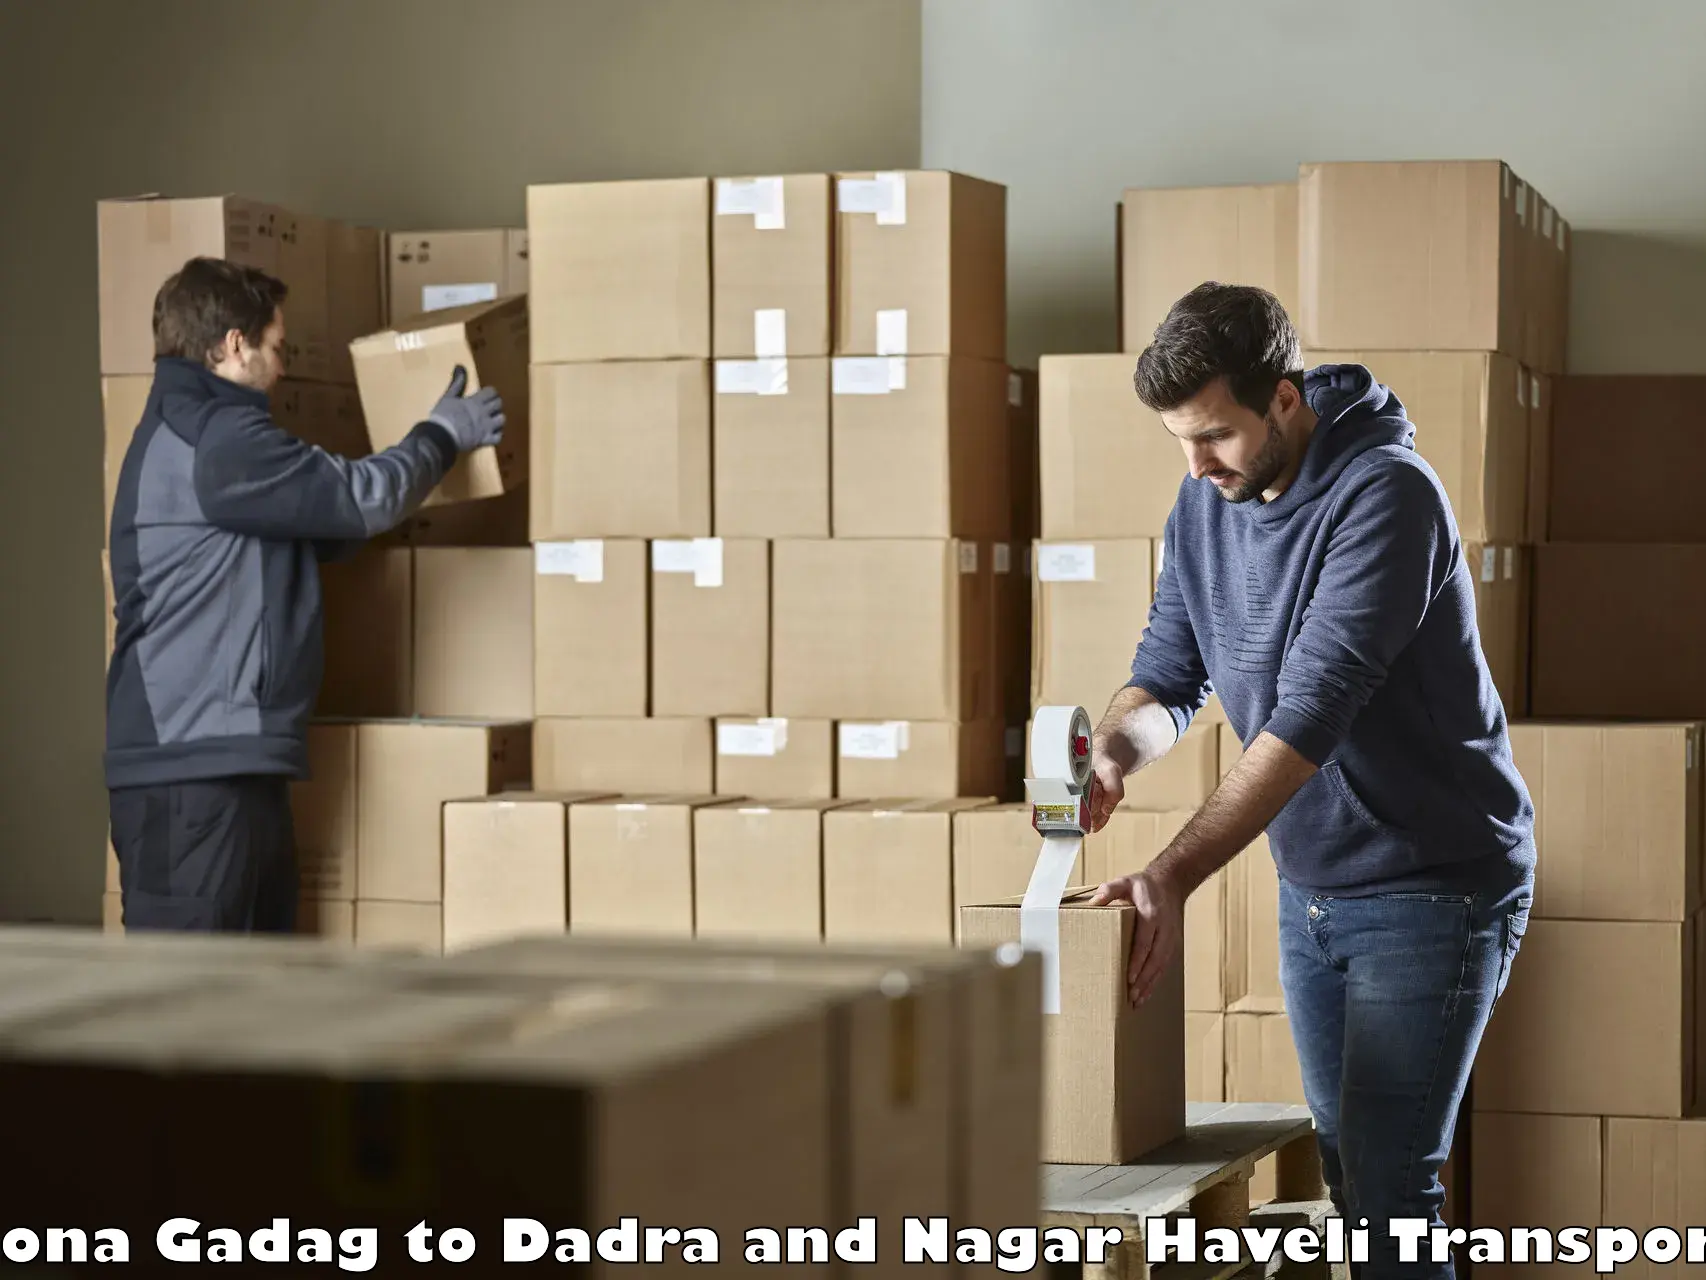 Truck transport companies in India in Rona Gadag to Dadra and Nagar Haveli